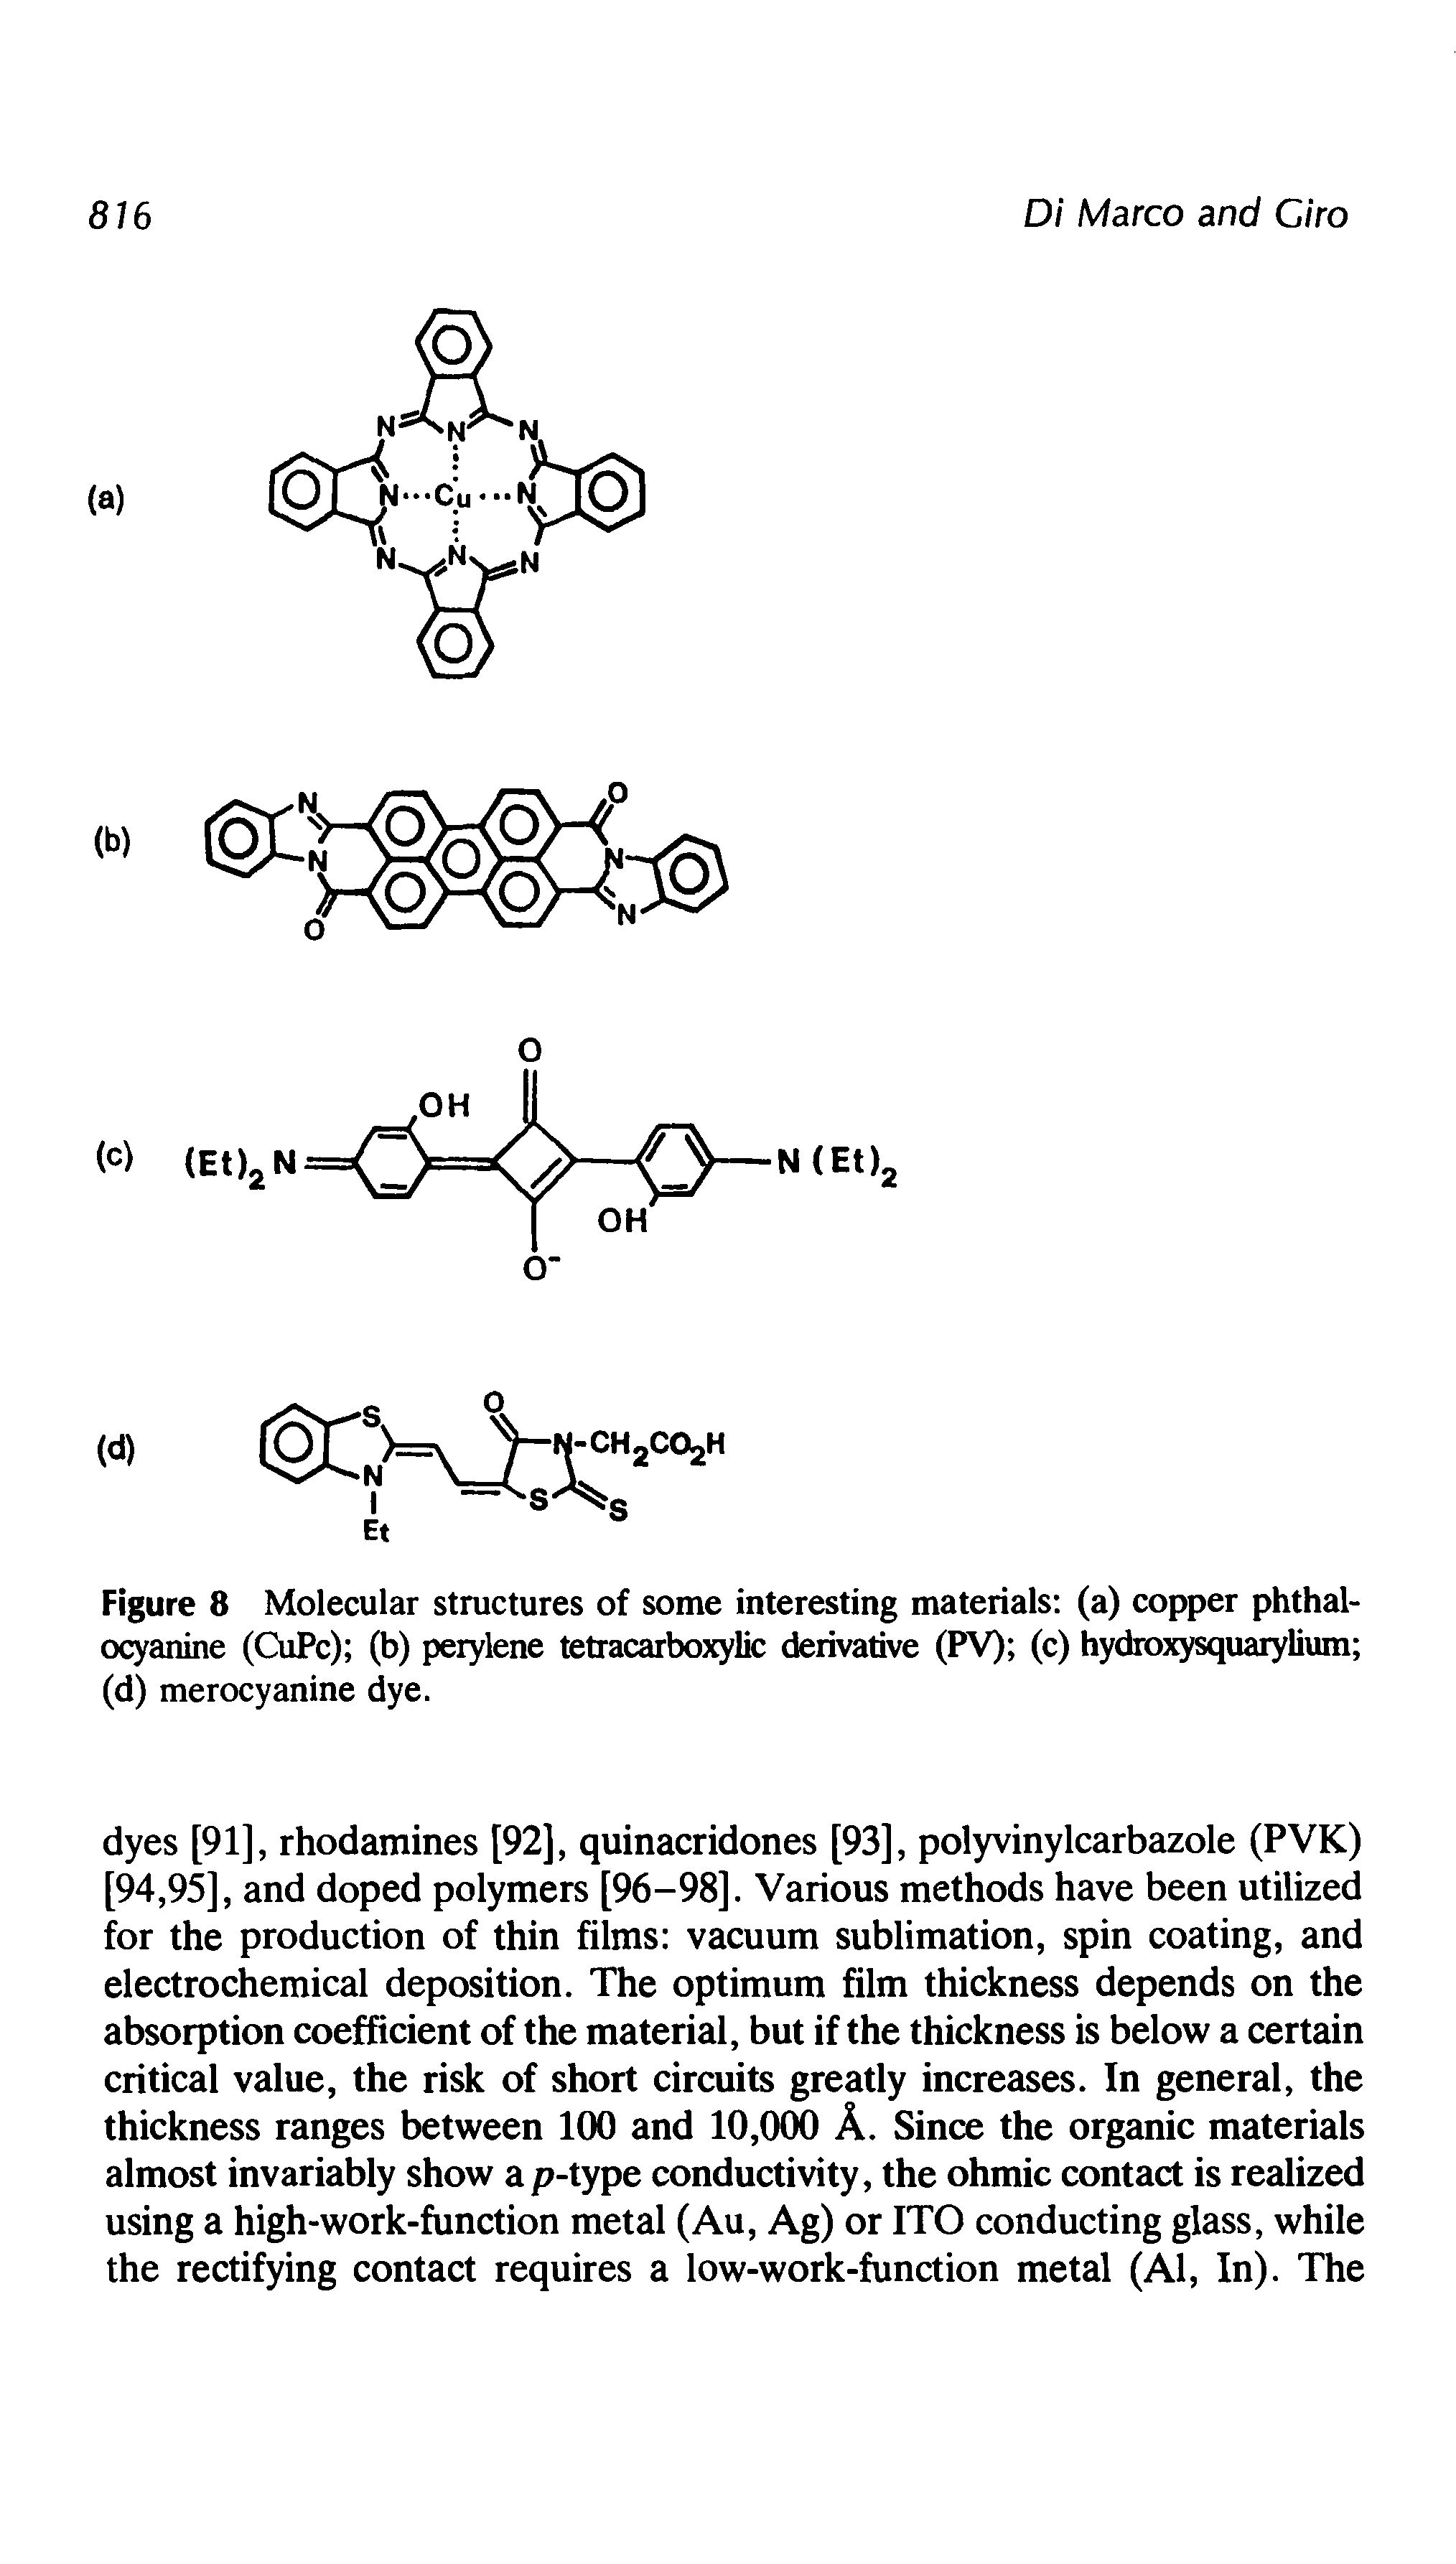 Figure 8 Molecular structures of some interesting materials (a) copper phthal-ocyanine (CuPc) (b) perylene tetracarboxylic derivative (PV) (c) hydroxysquarylium (d) merocyanine dye.